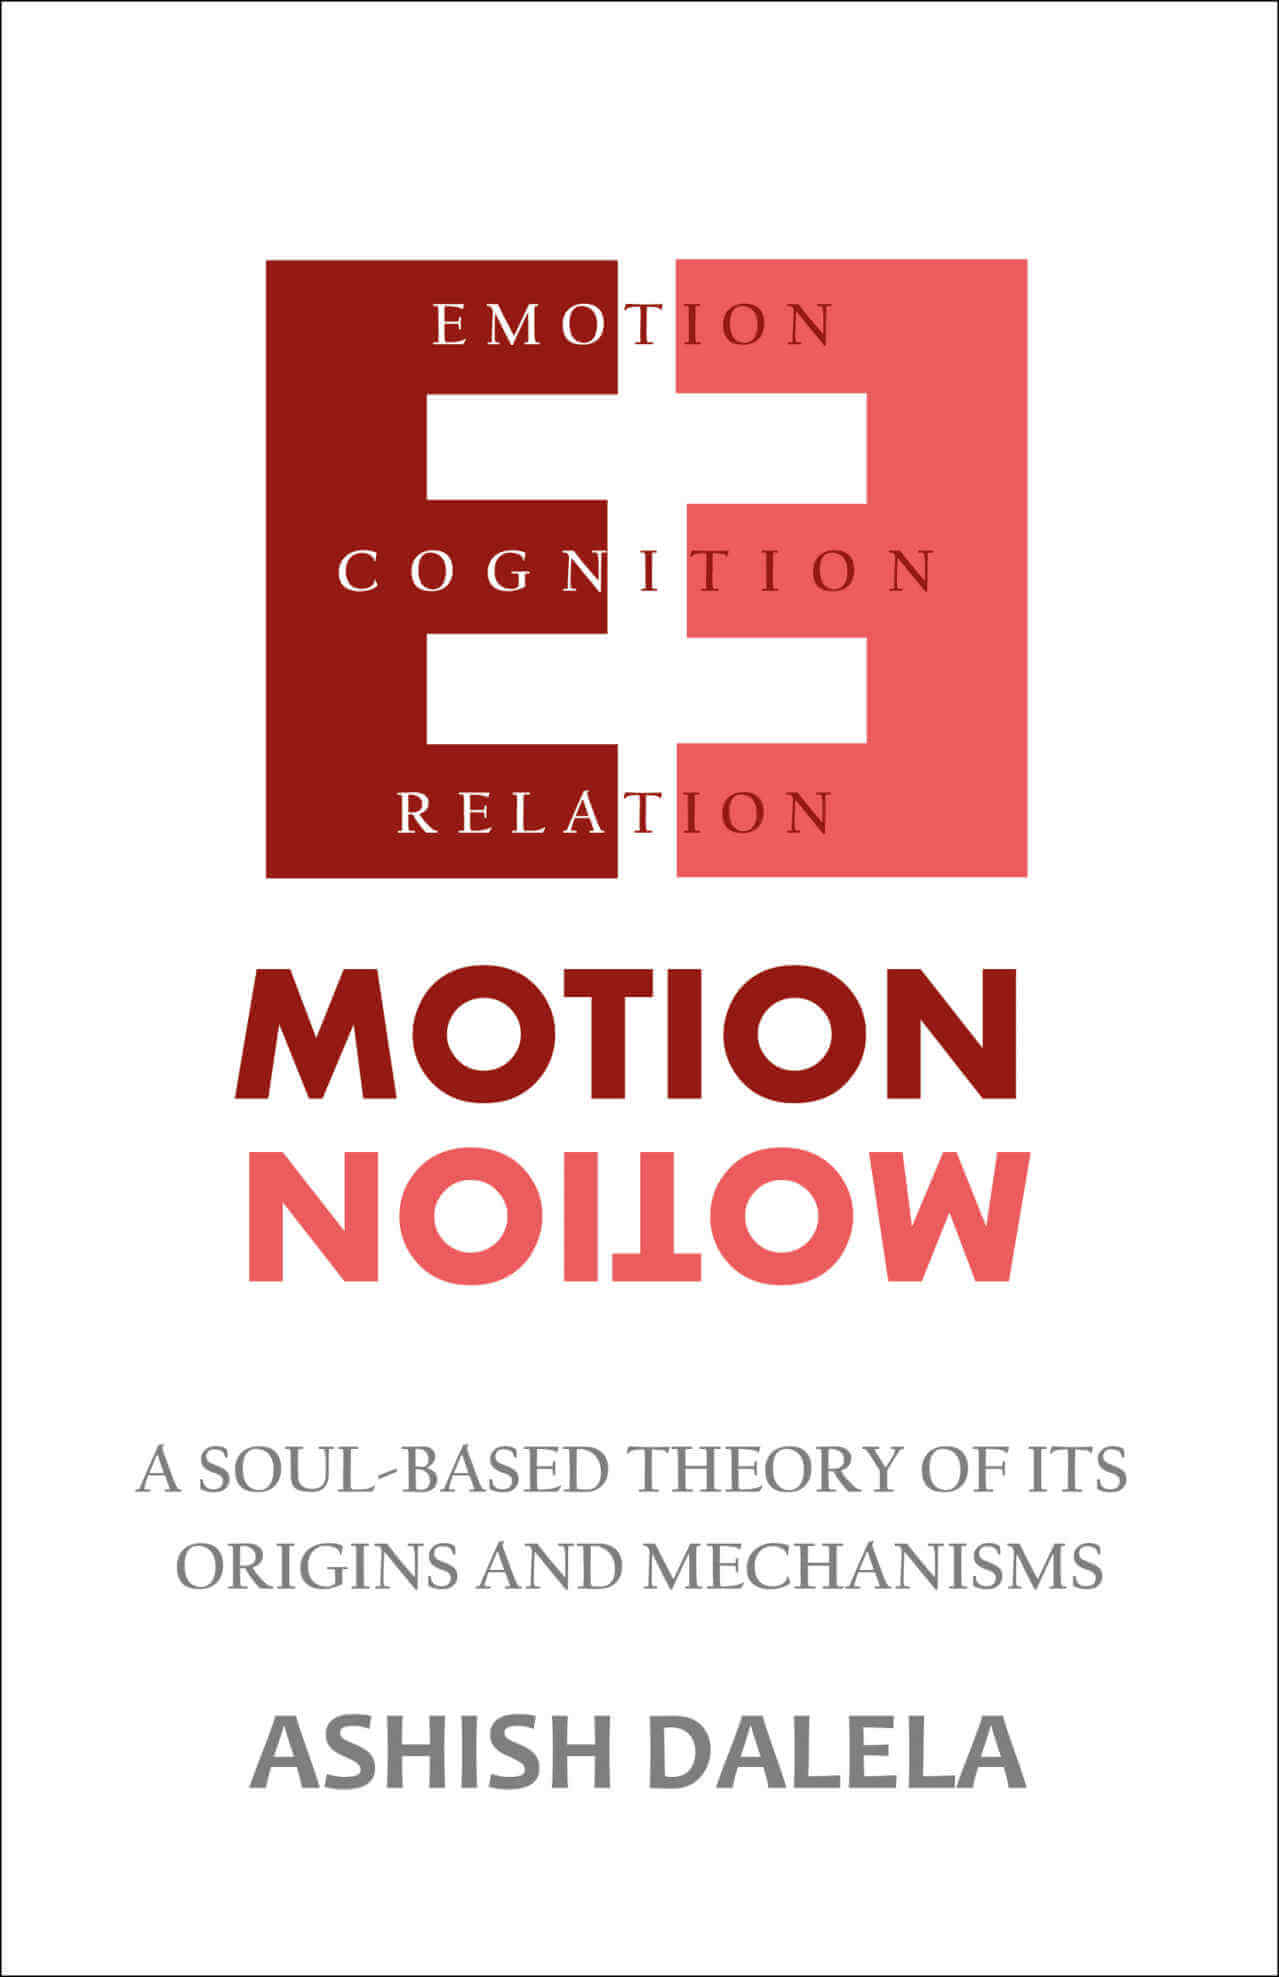 Emotion: A Soul-Based Theory of Its Origins and Mechanisms